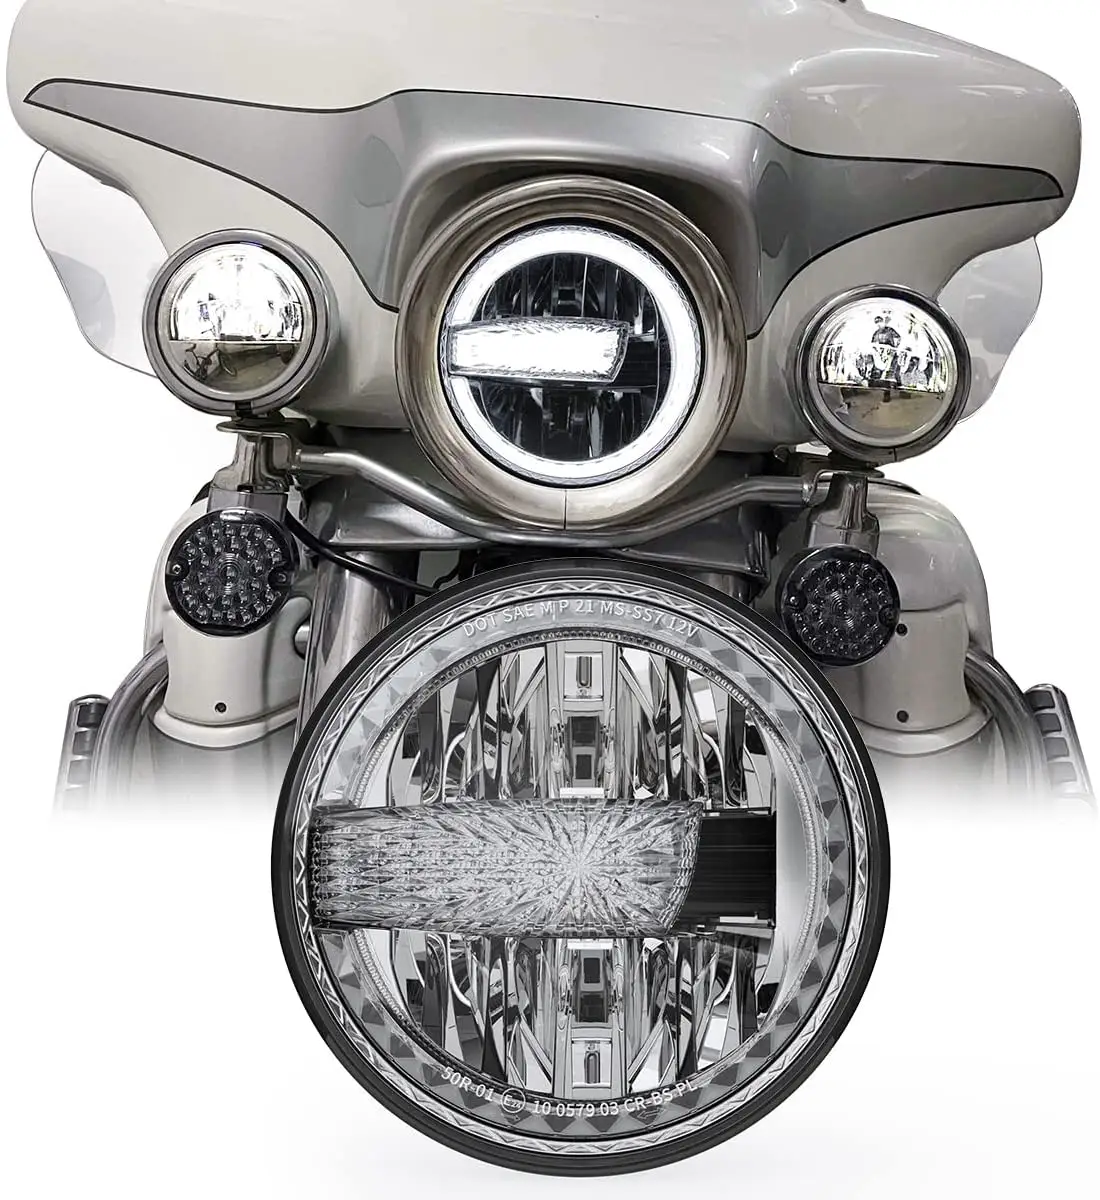 7" inch H4 led moto headlight for Harley assembly parts with DRL for Harley Davidson Touring Models 1994-2013